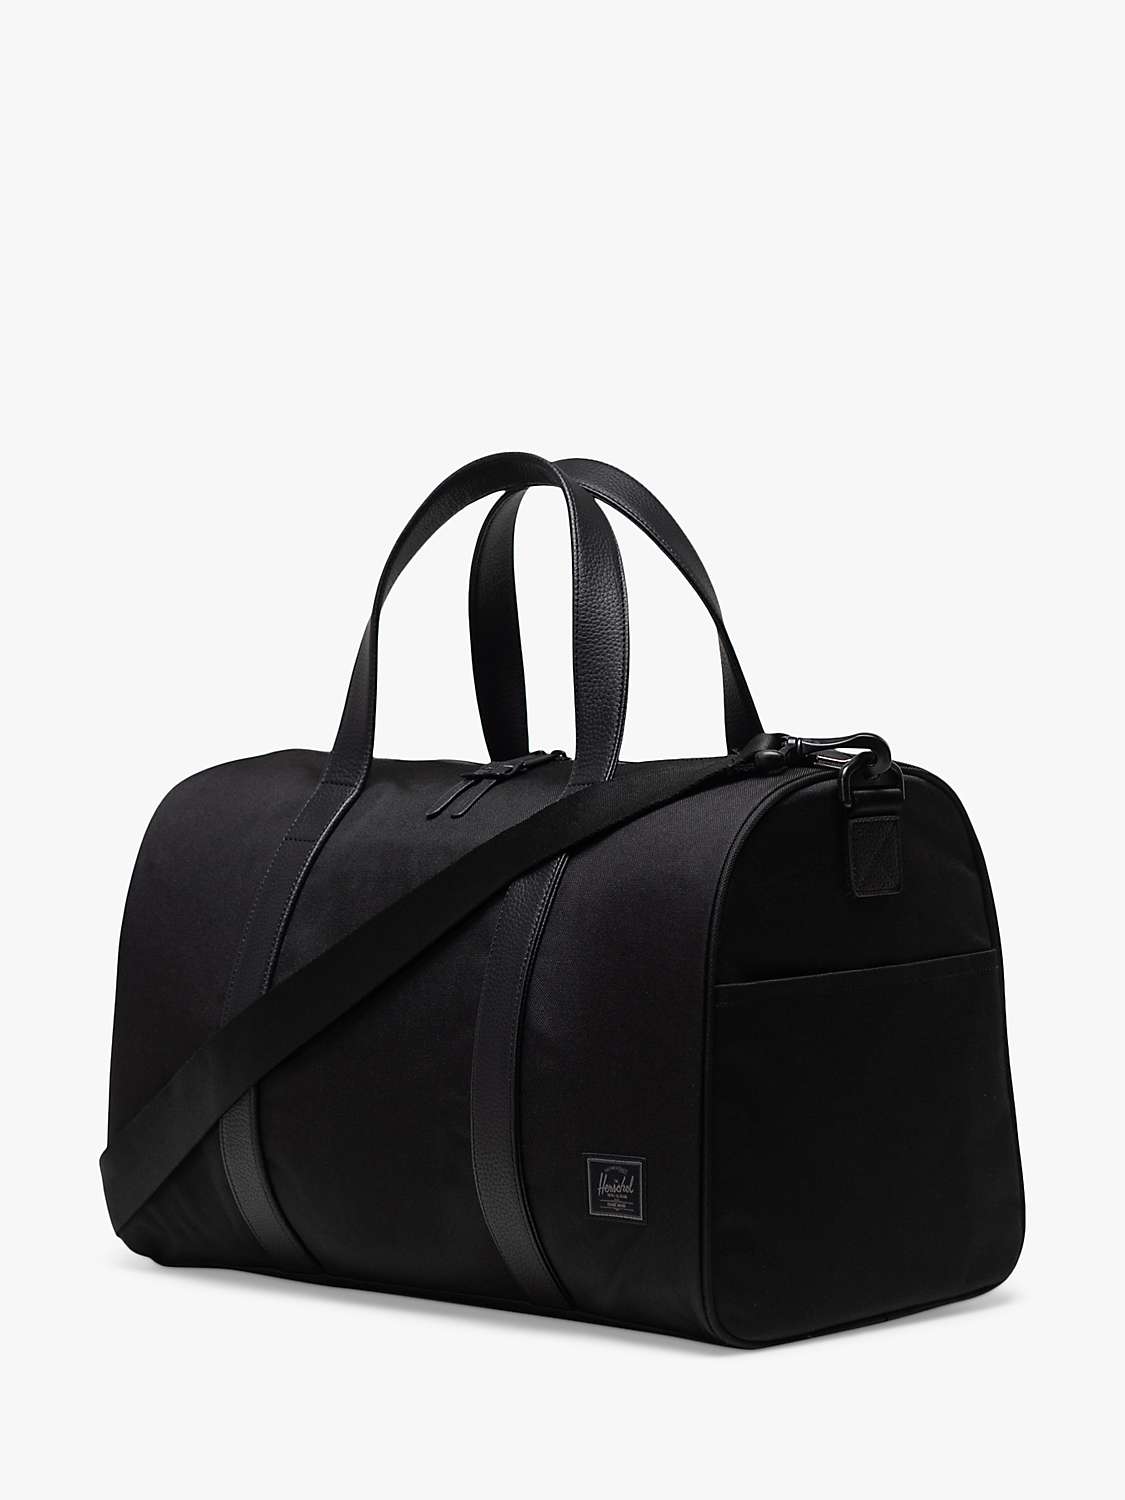 Buy Herschel Supply Co. Carry On Holdall Online at johnlewis.com